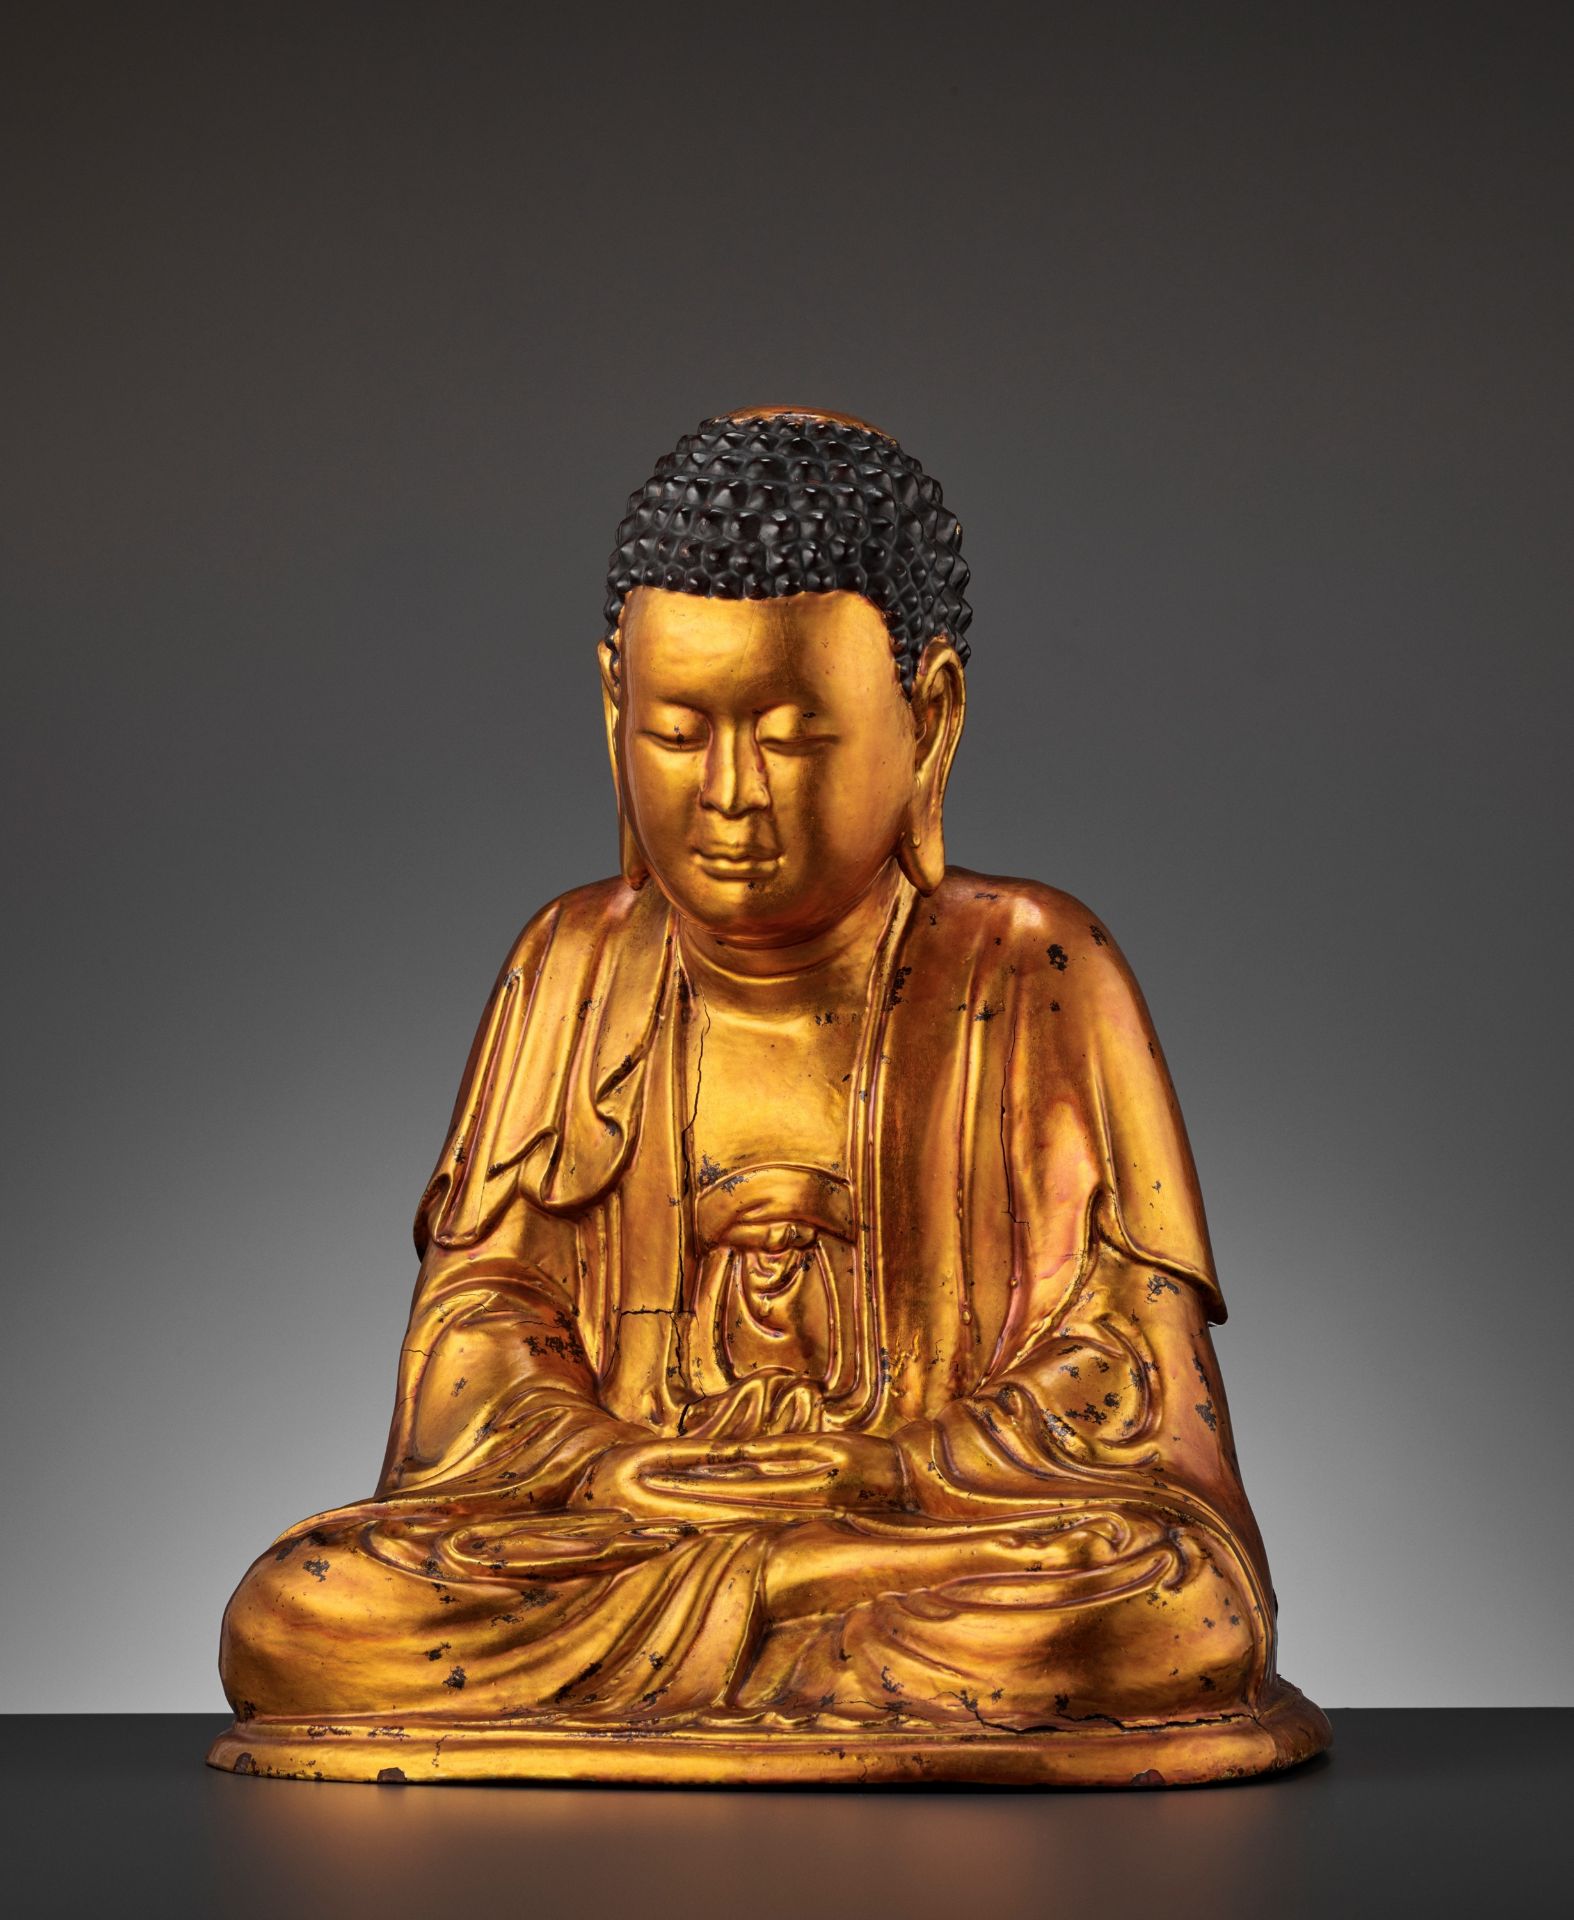 A MASSIVE GILT-LACQUERED WOOD FIGURE OF BUDDHA, 18TH-19TH CENTURY